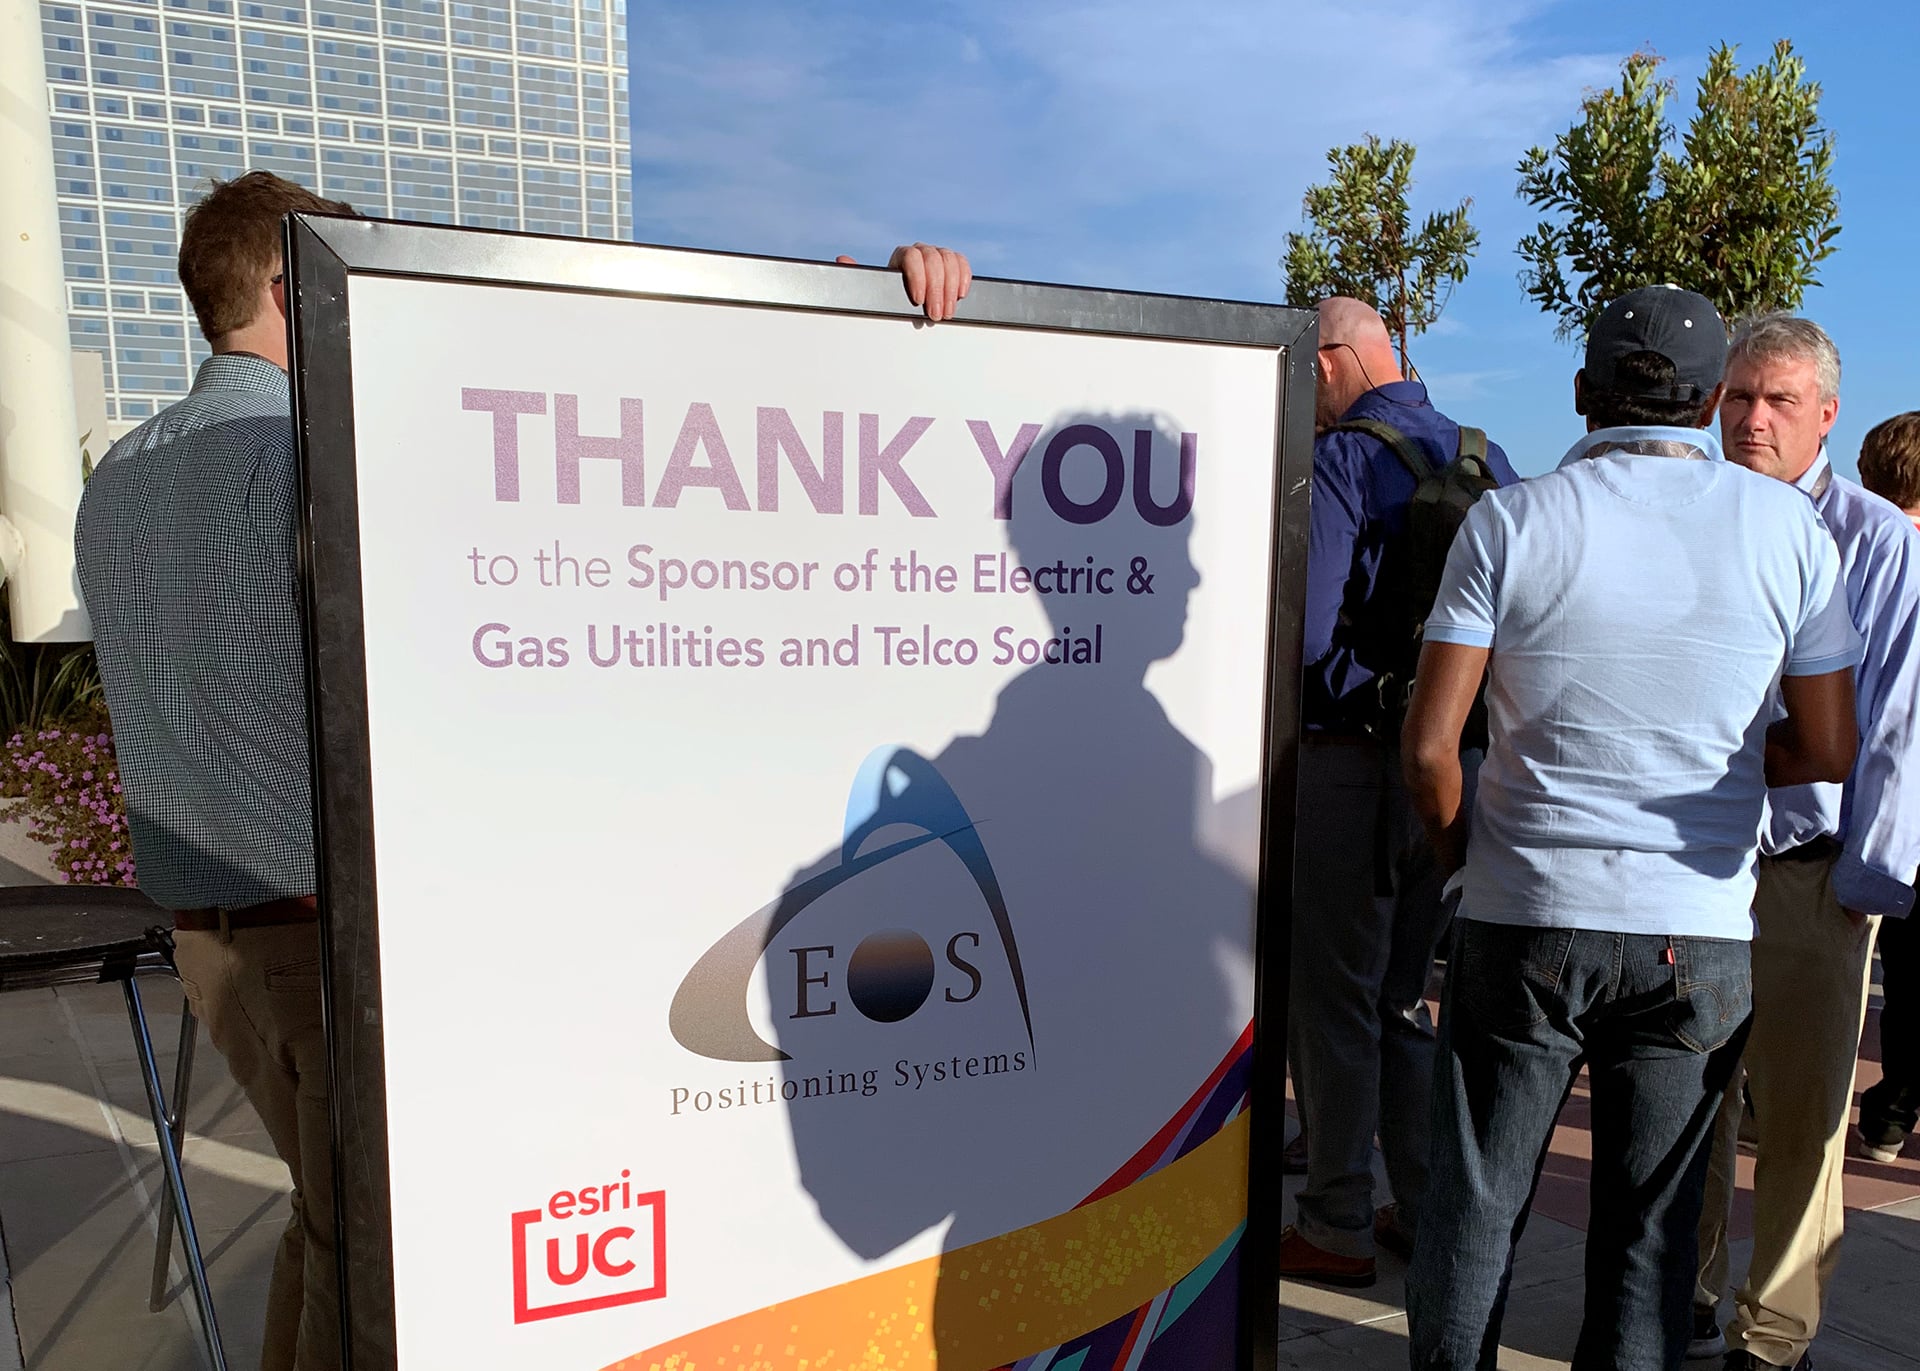 An Eos sponsor signs sits at the Esri Electric & Gas Utilities Social at the 2022 Esri UC